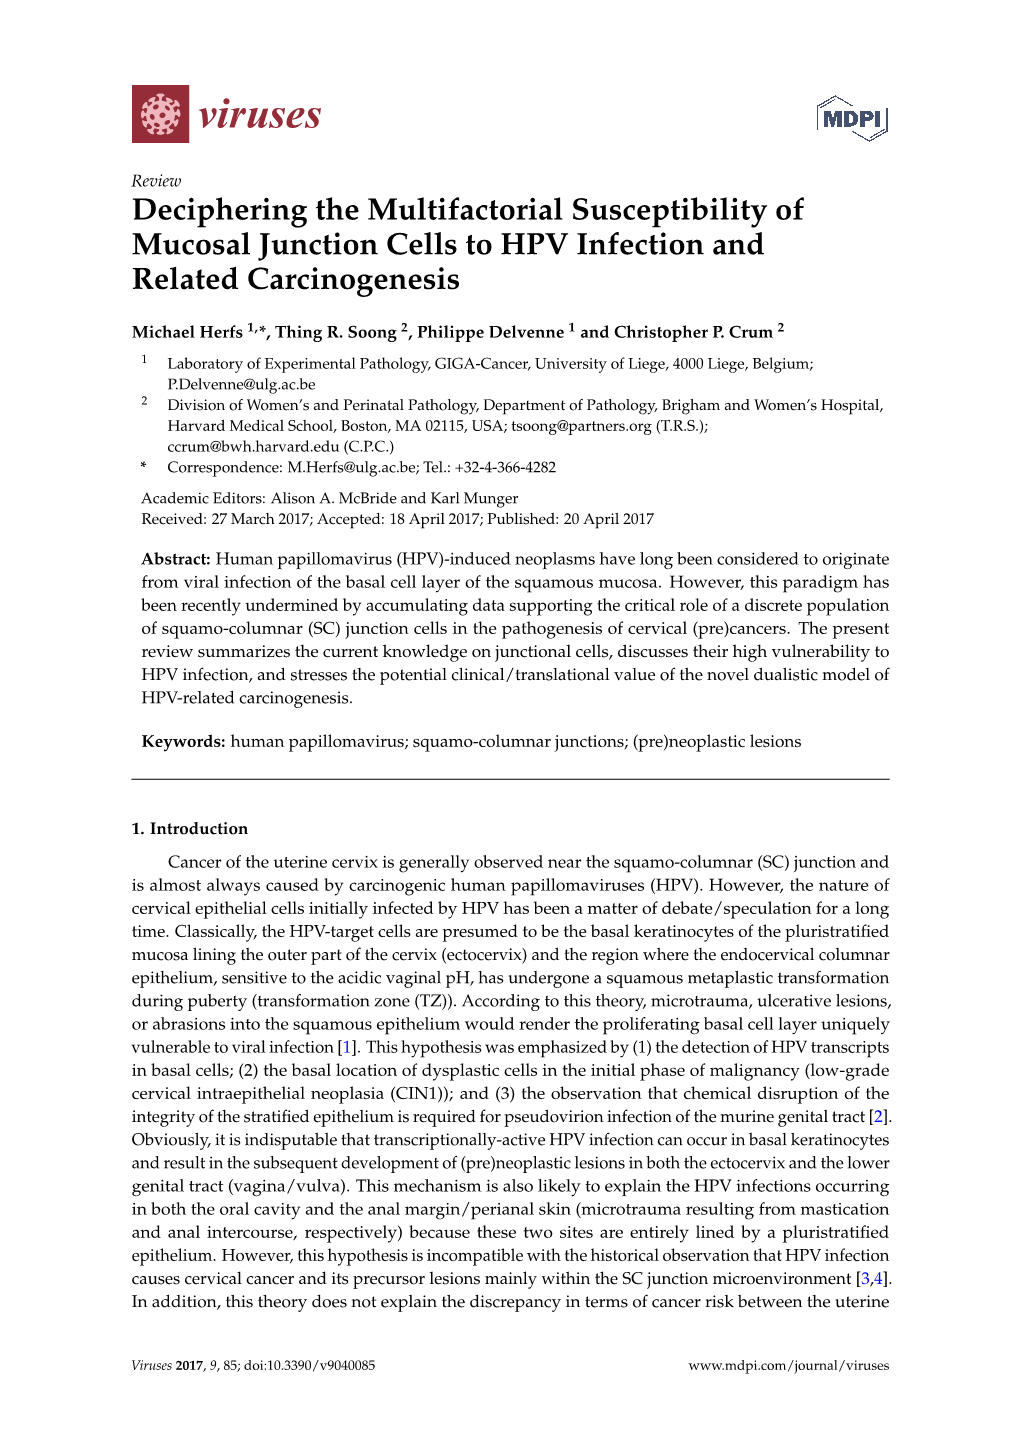 Deciphering the Multifactorial Susceptibility of Mucosal Junction Cells to HPV Infection and Related Carcinogenesis